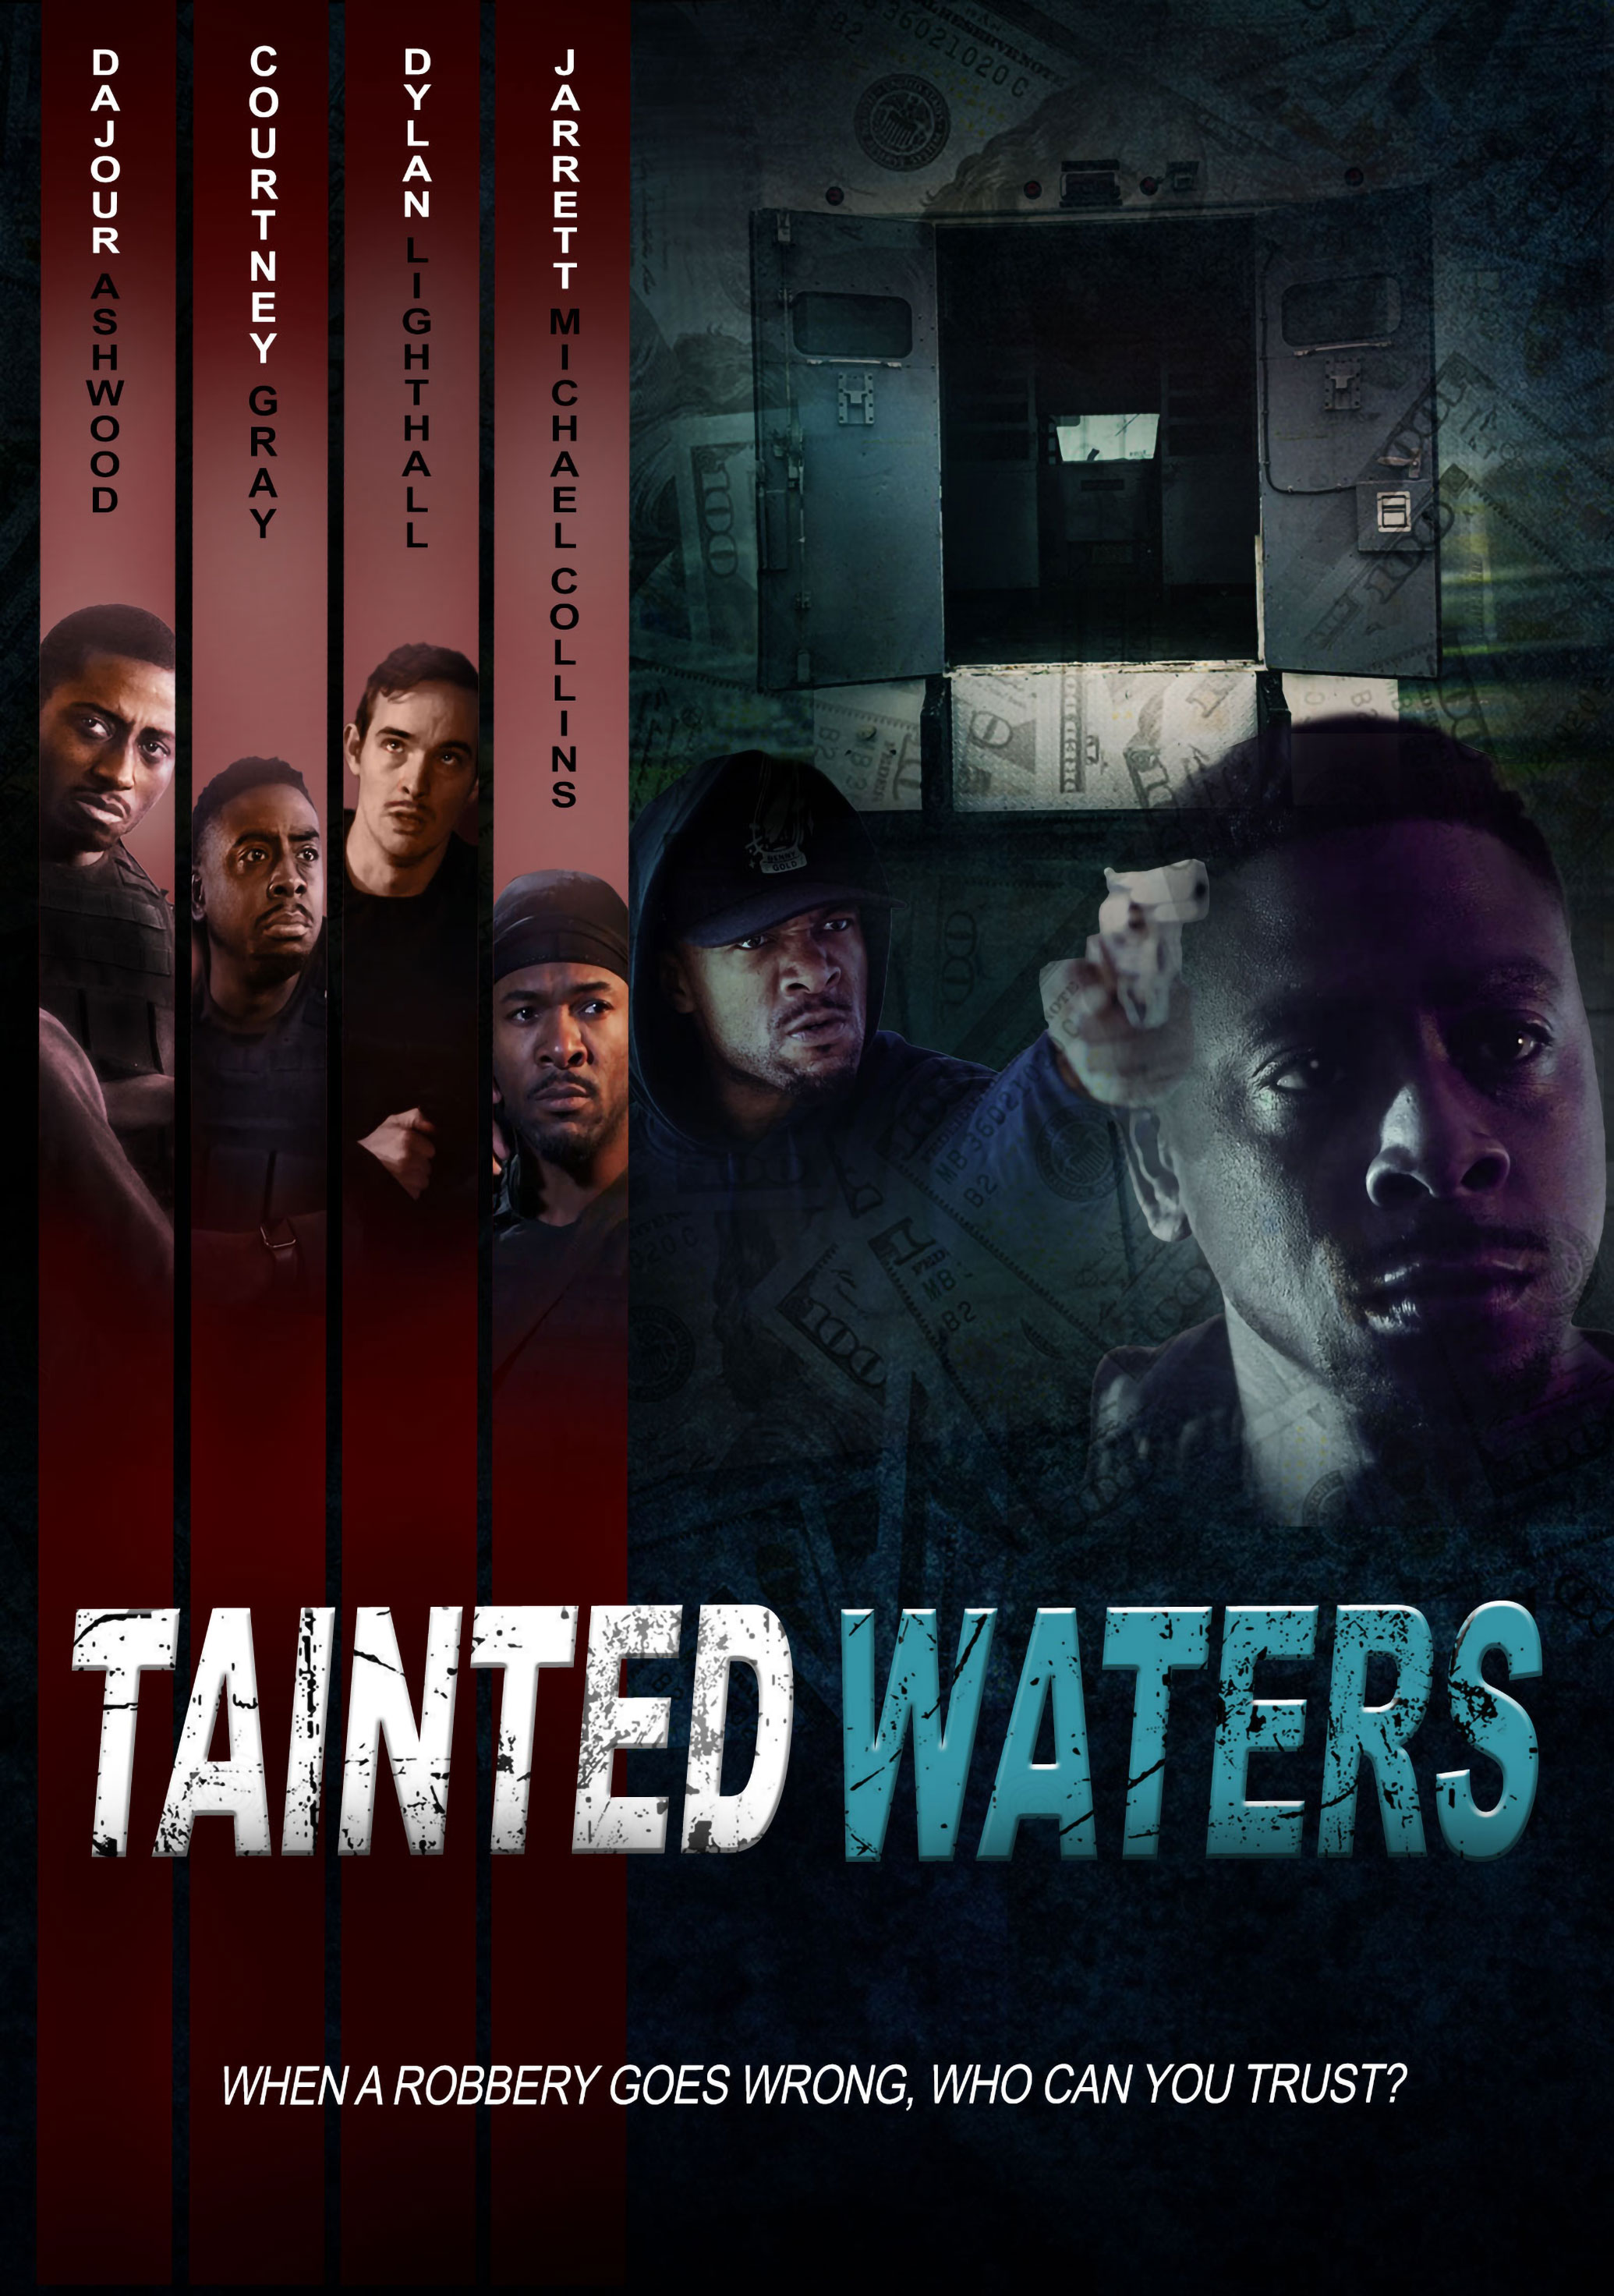 https://www.maverickentertainment.cc/images/movies/hi-res/tainted-waters.jpg